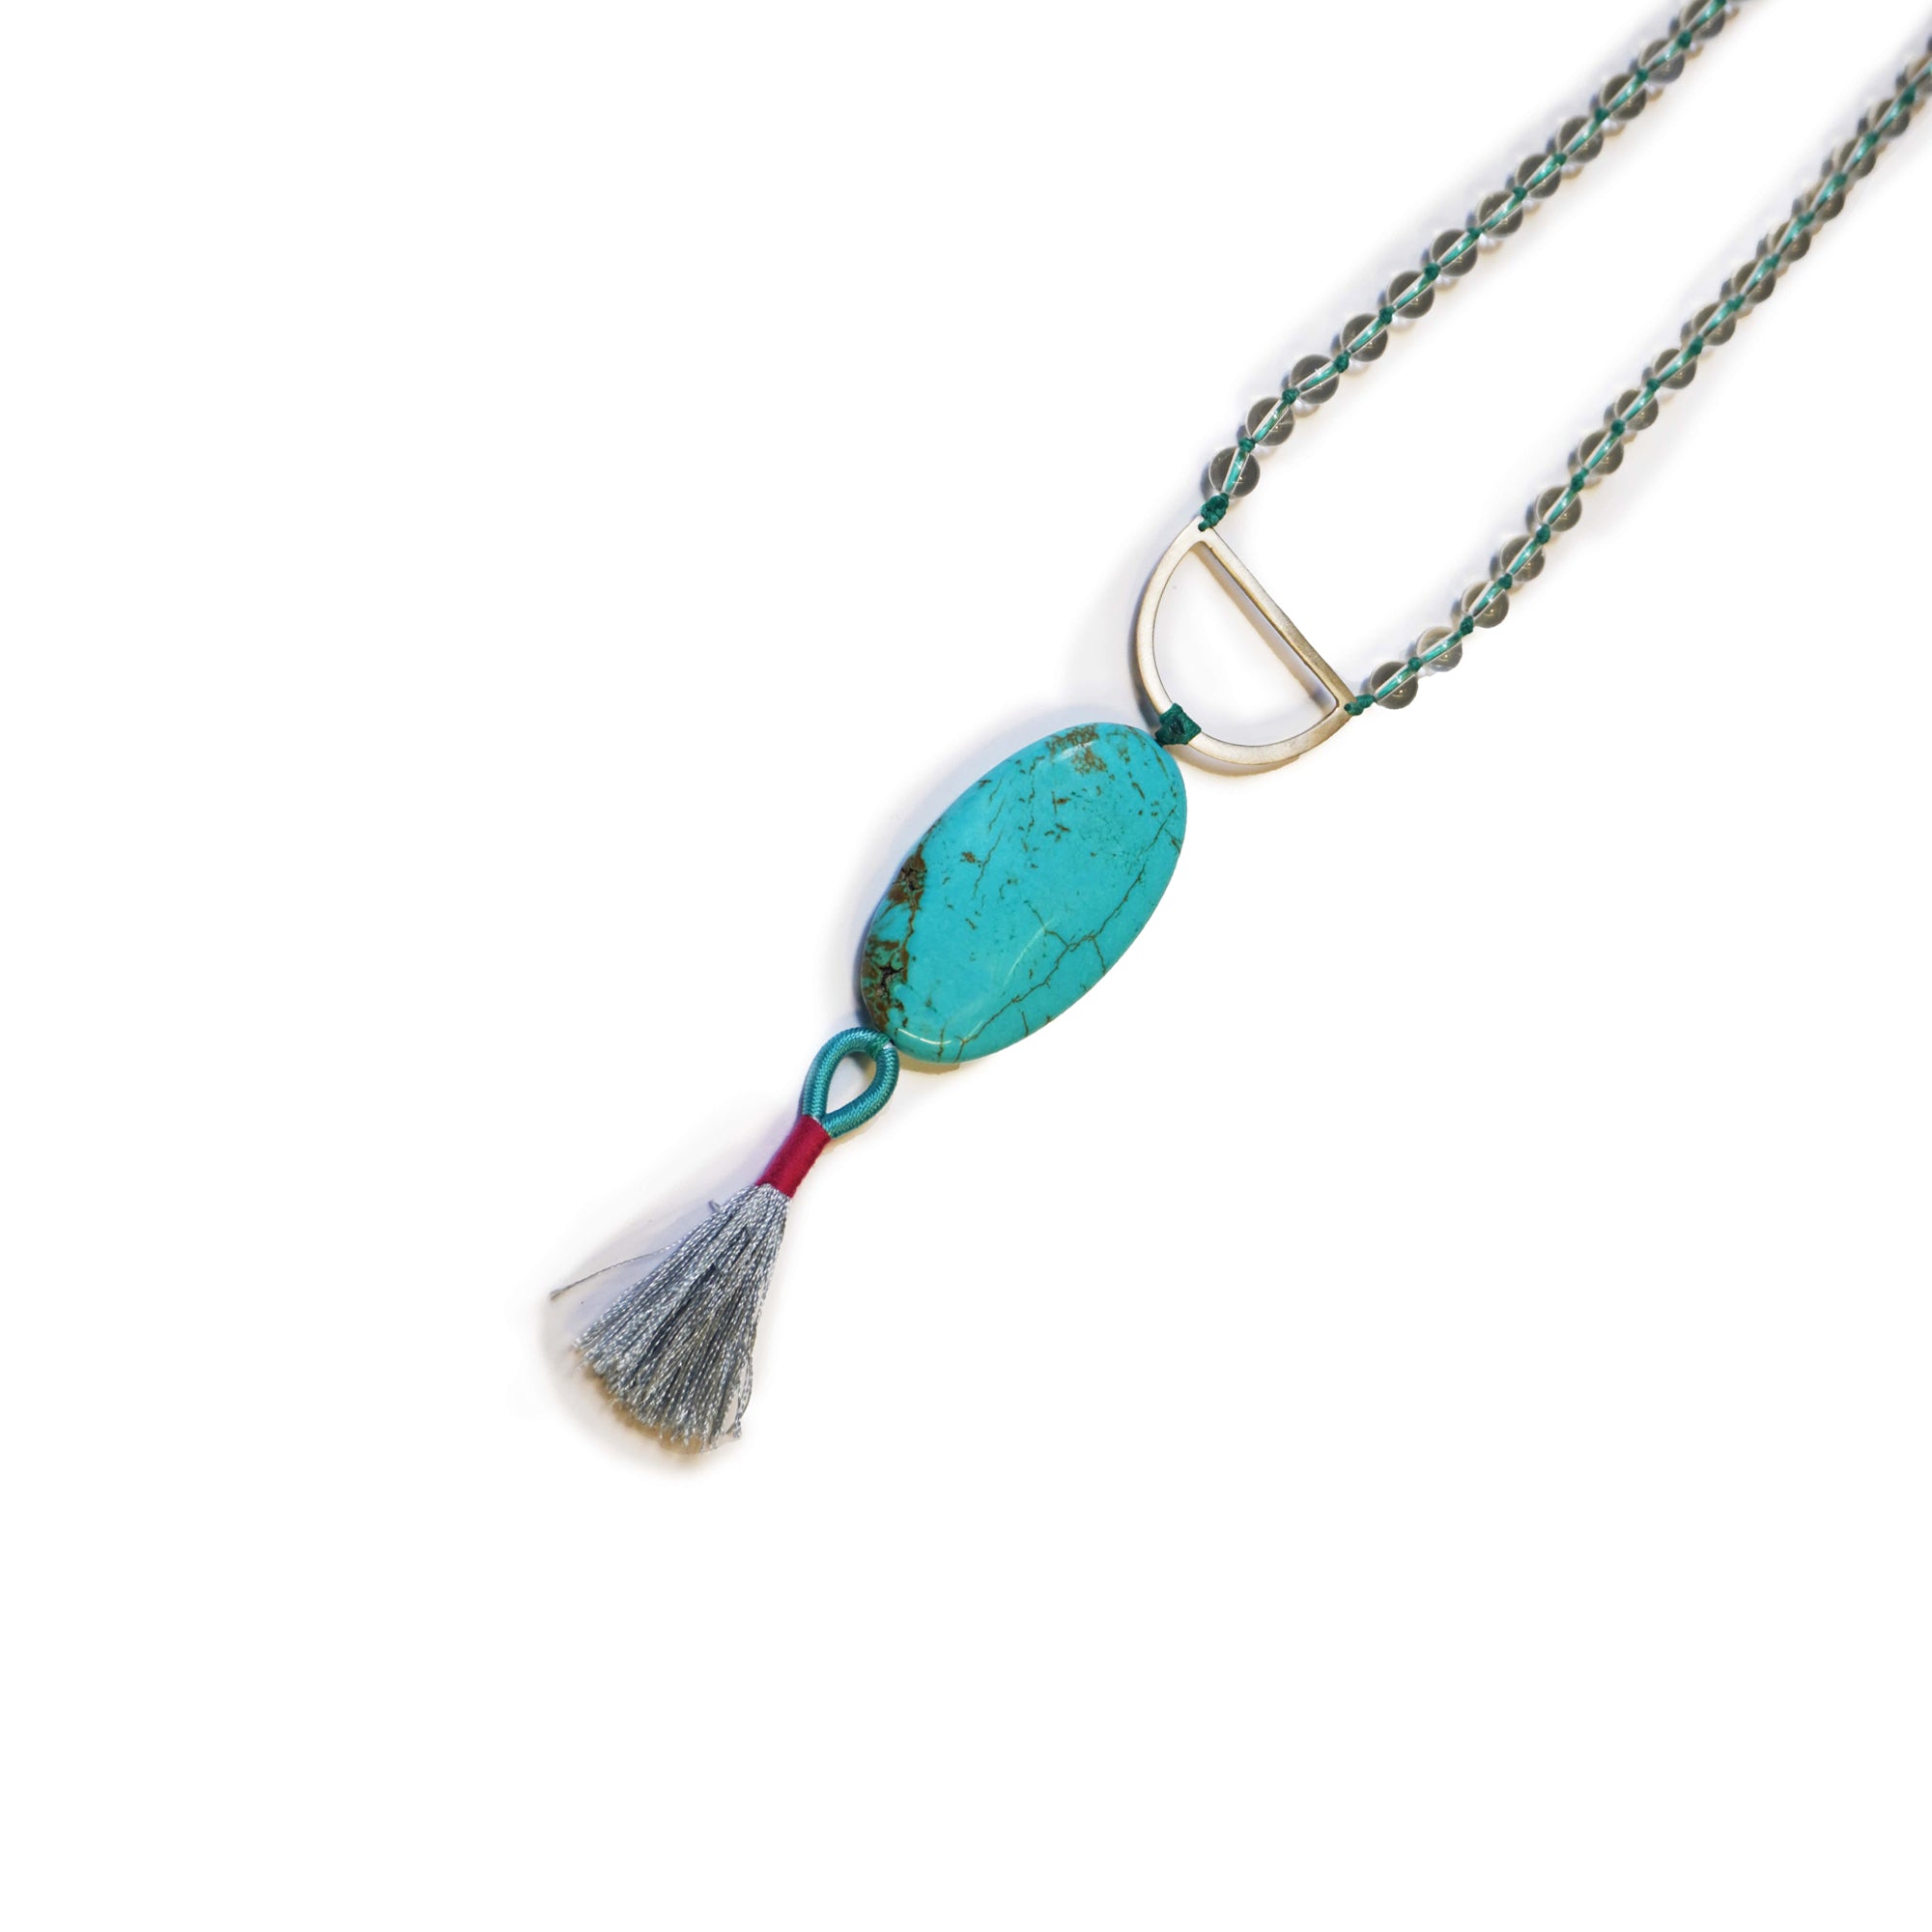 Calm Thoughts Mala Necklace